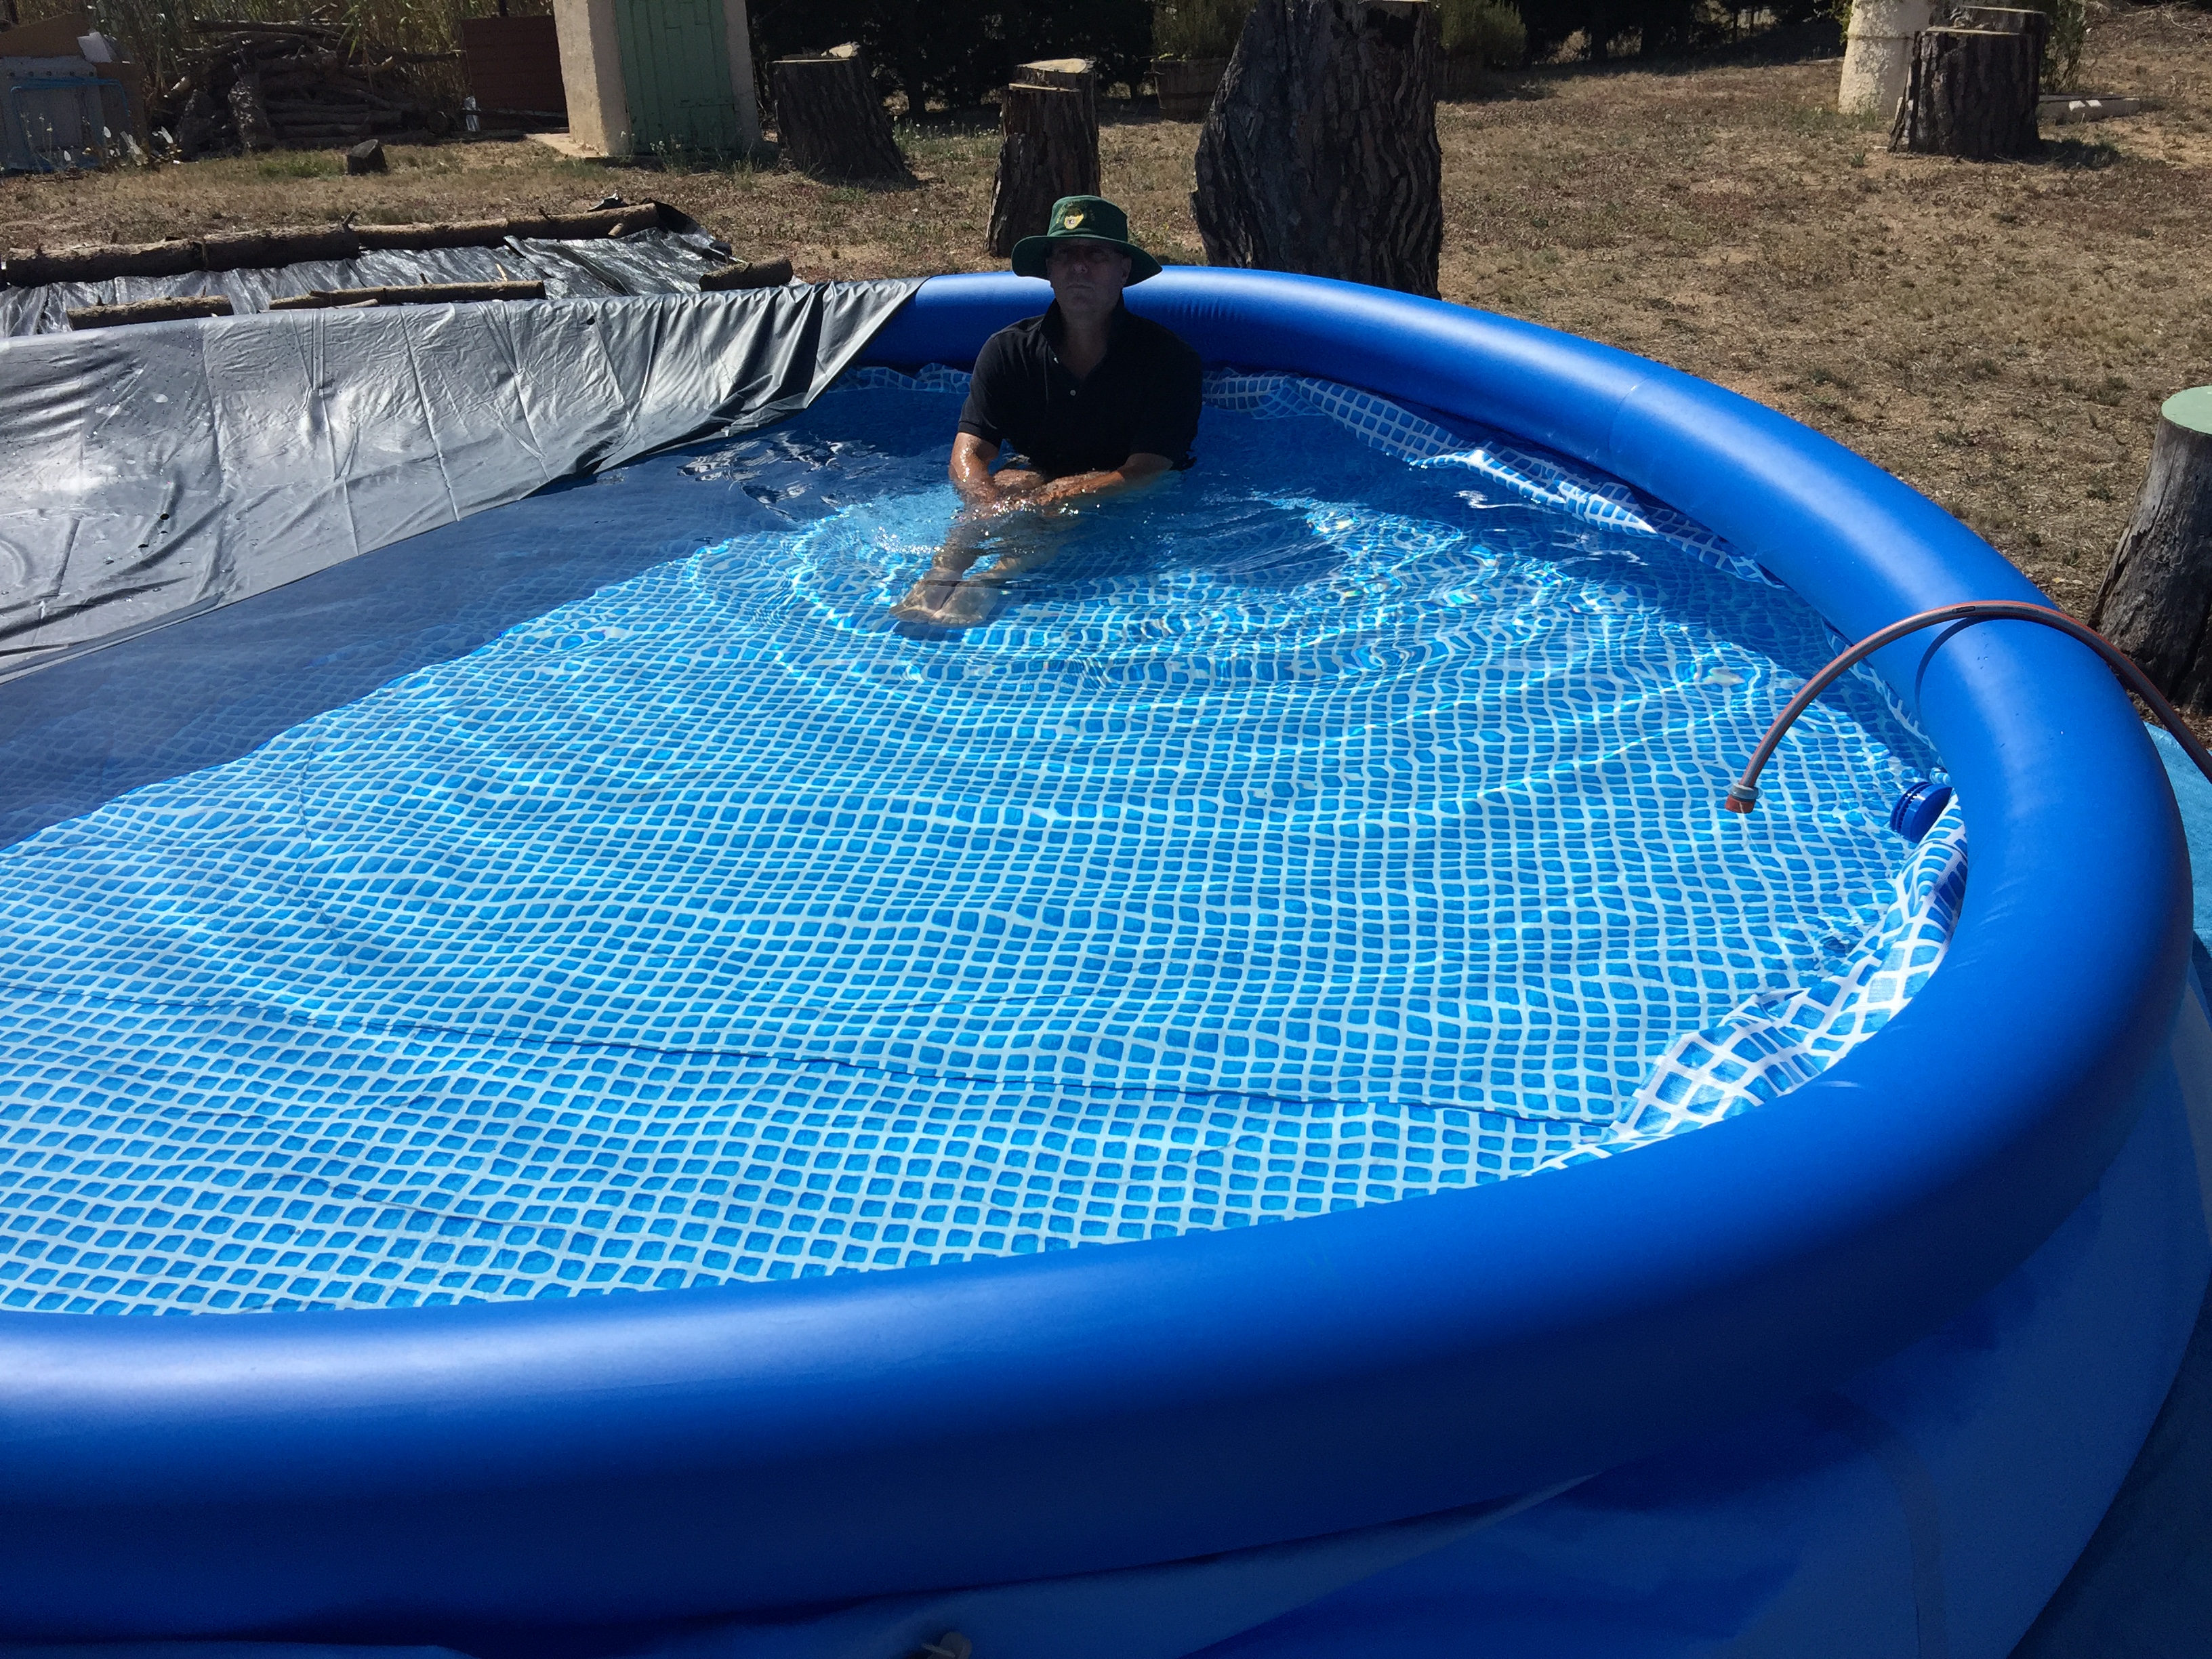 Our first above ground pool was ready.